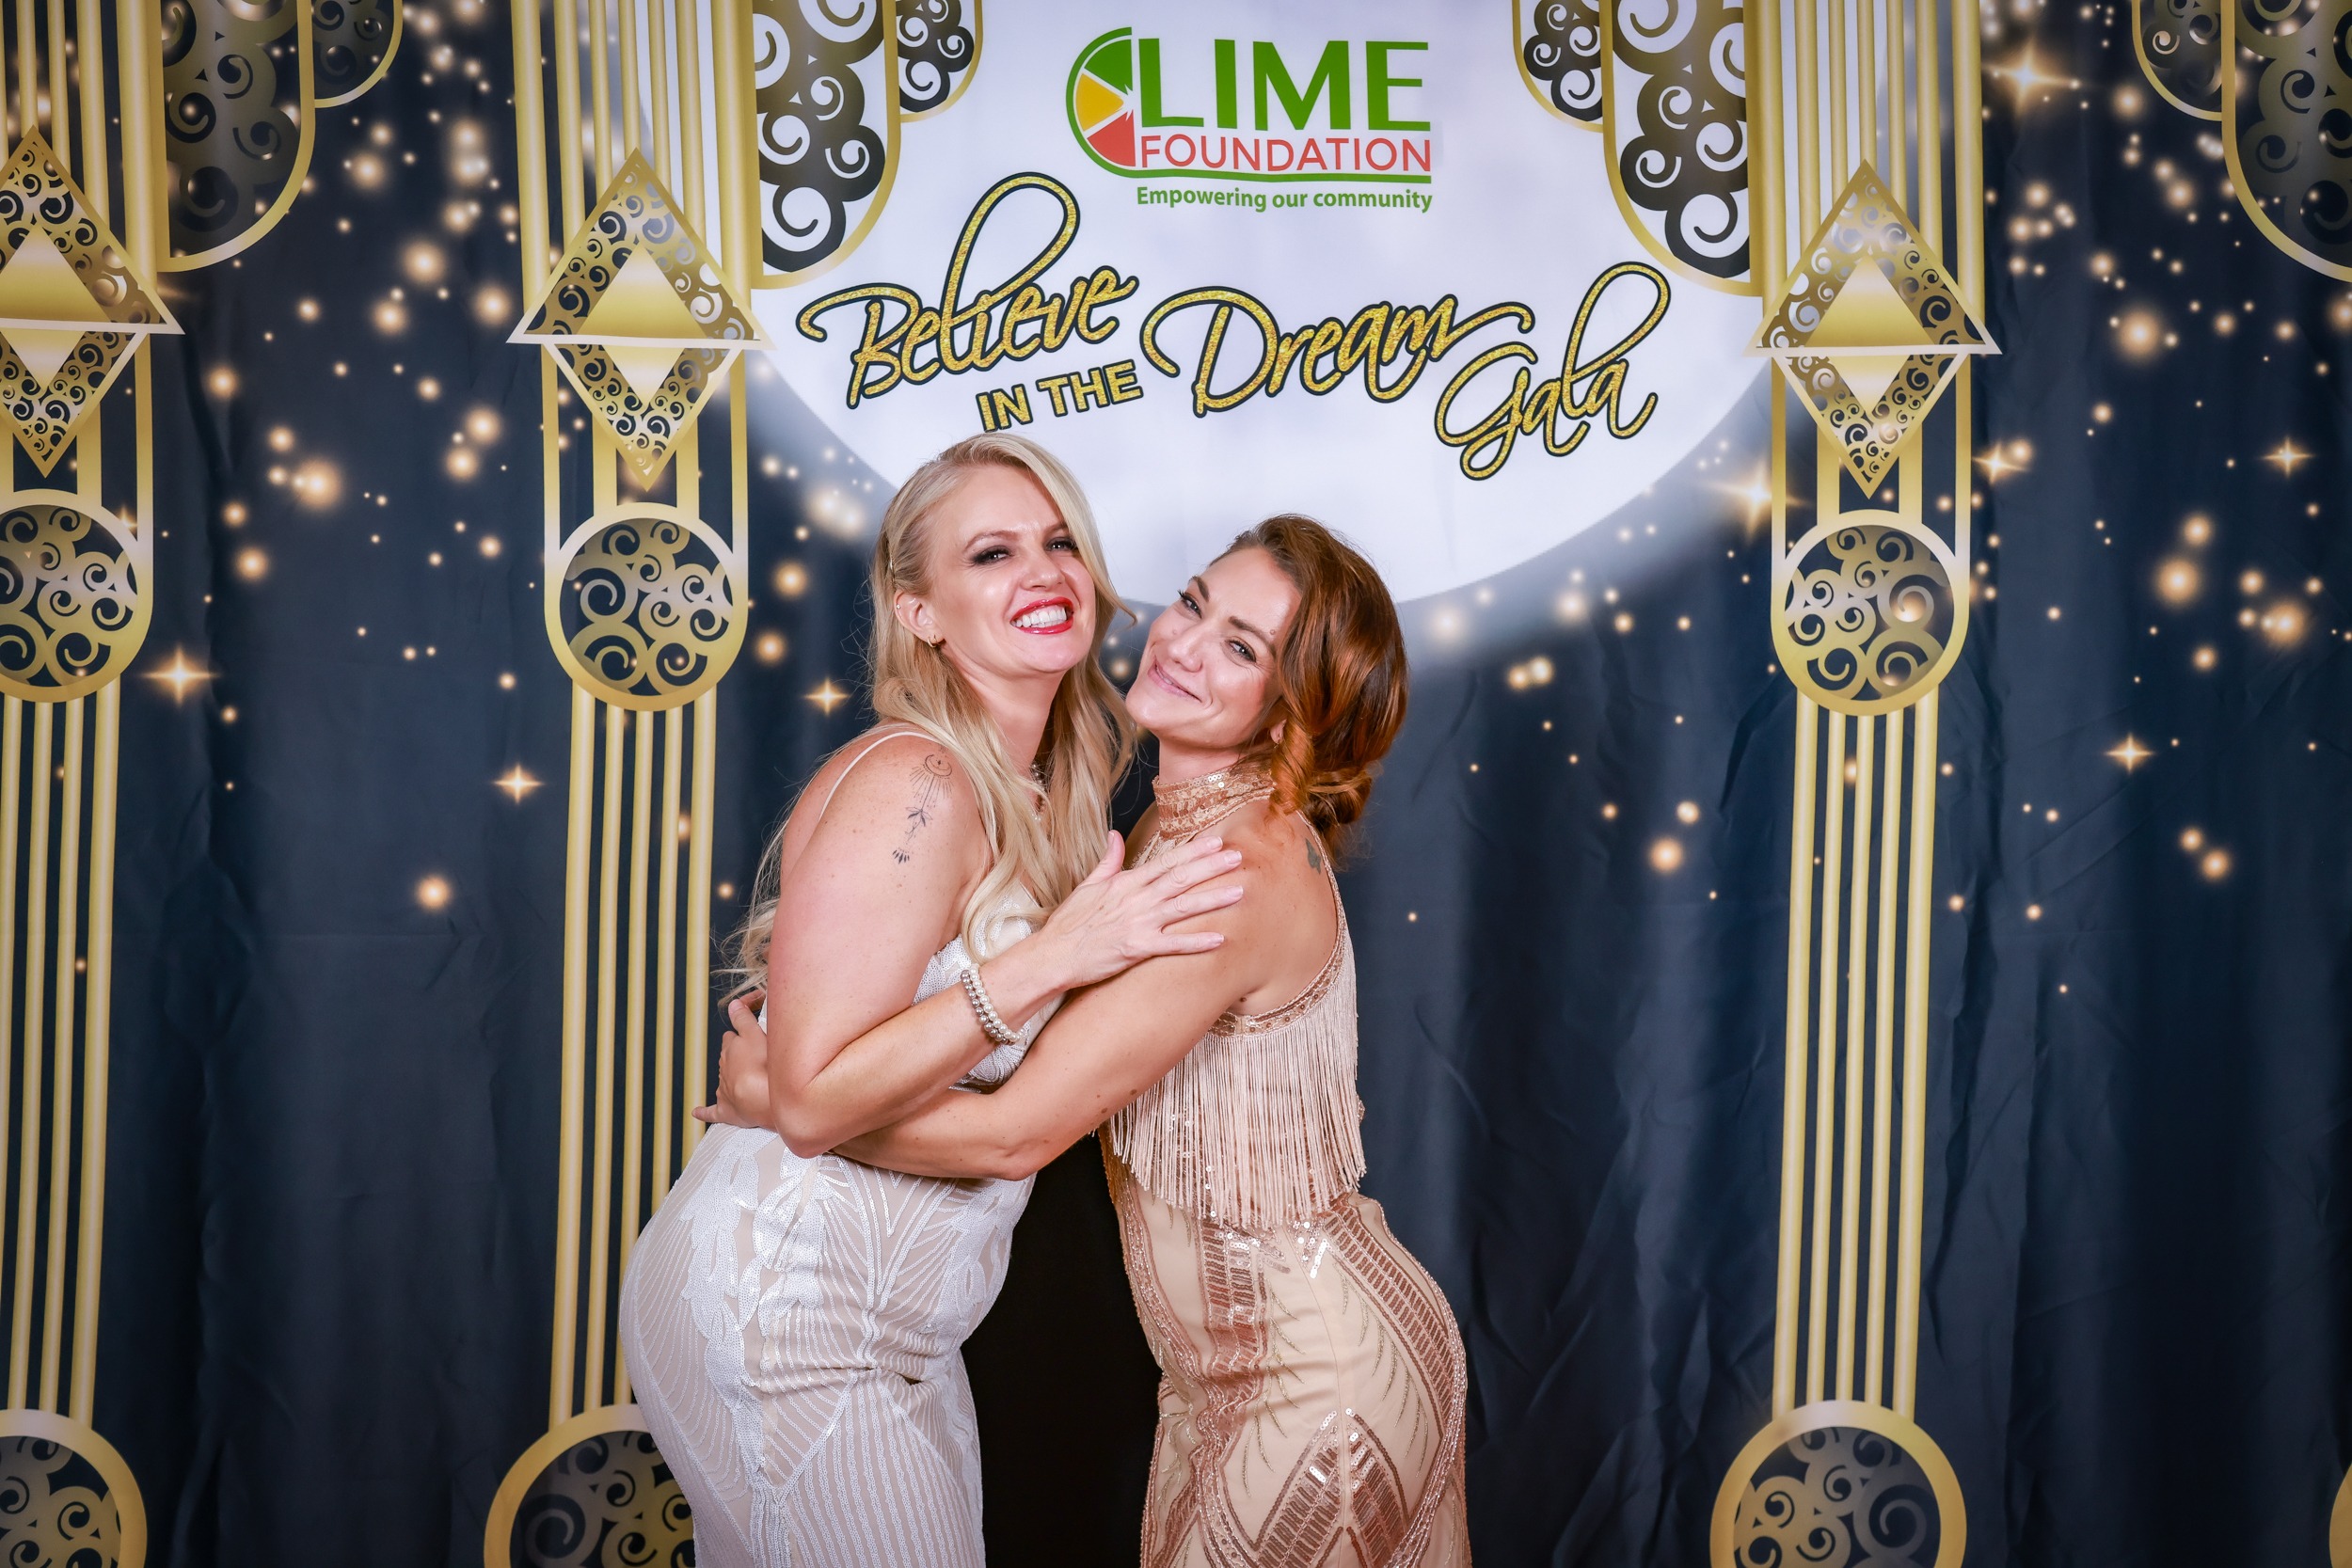 Two women posing in front of a photo booth at the LIME Foundation event.